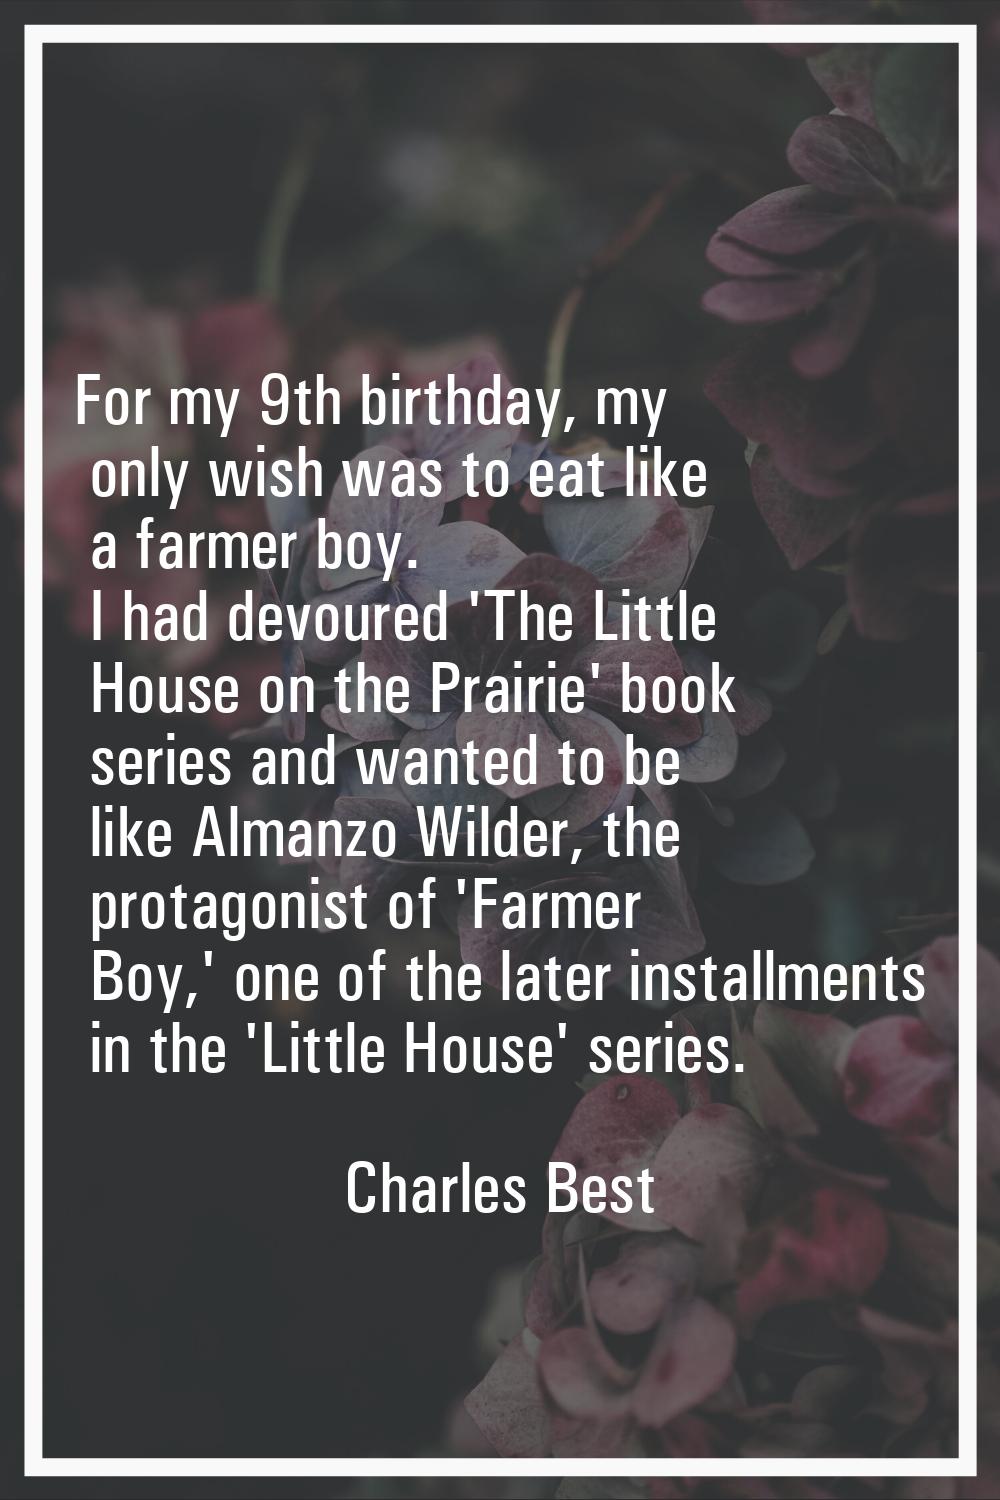 For my 9th birthday, my only wish was to eat like a farmer boy. I had devoured 'The Little House on